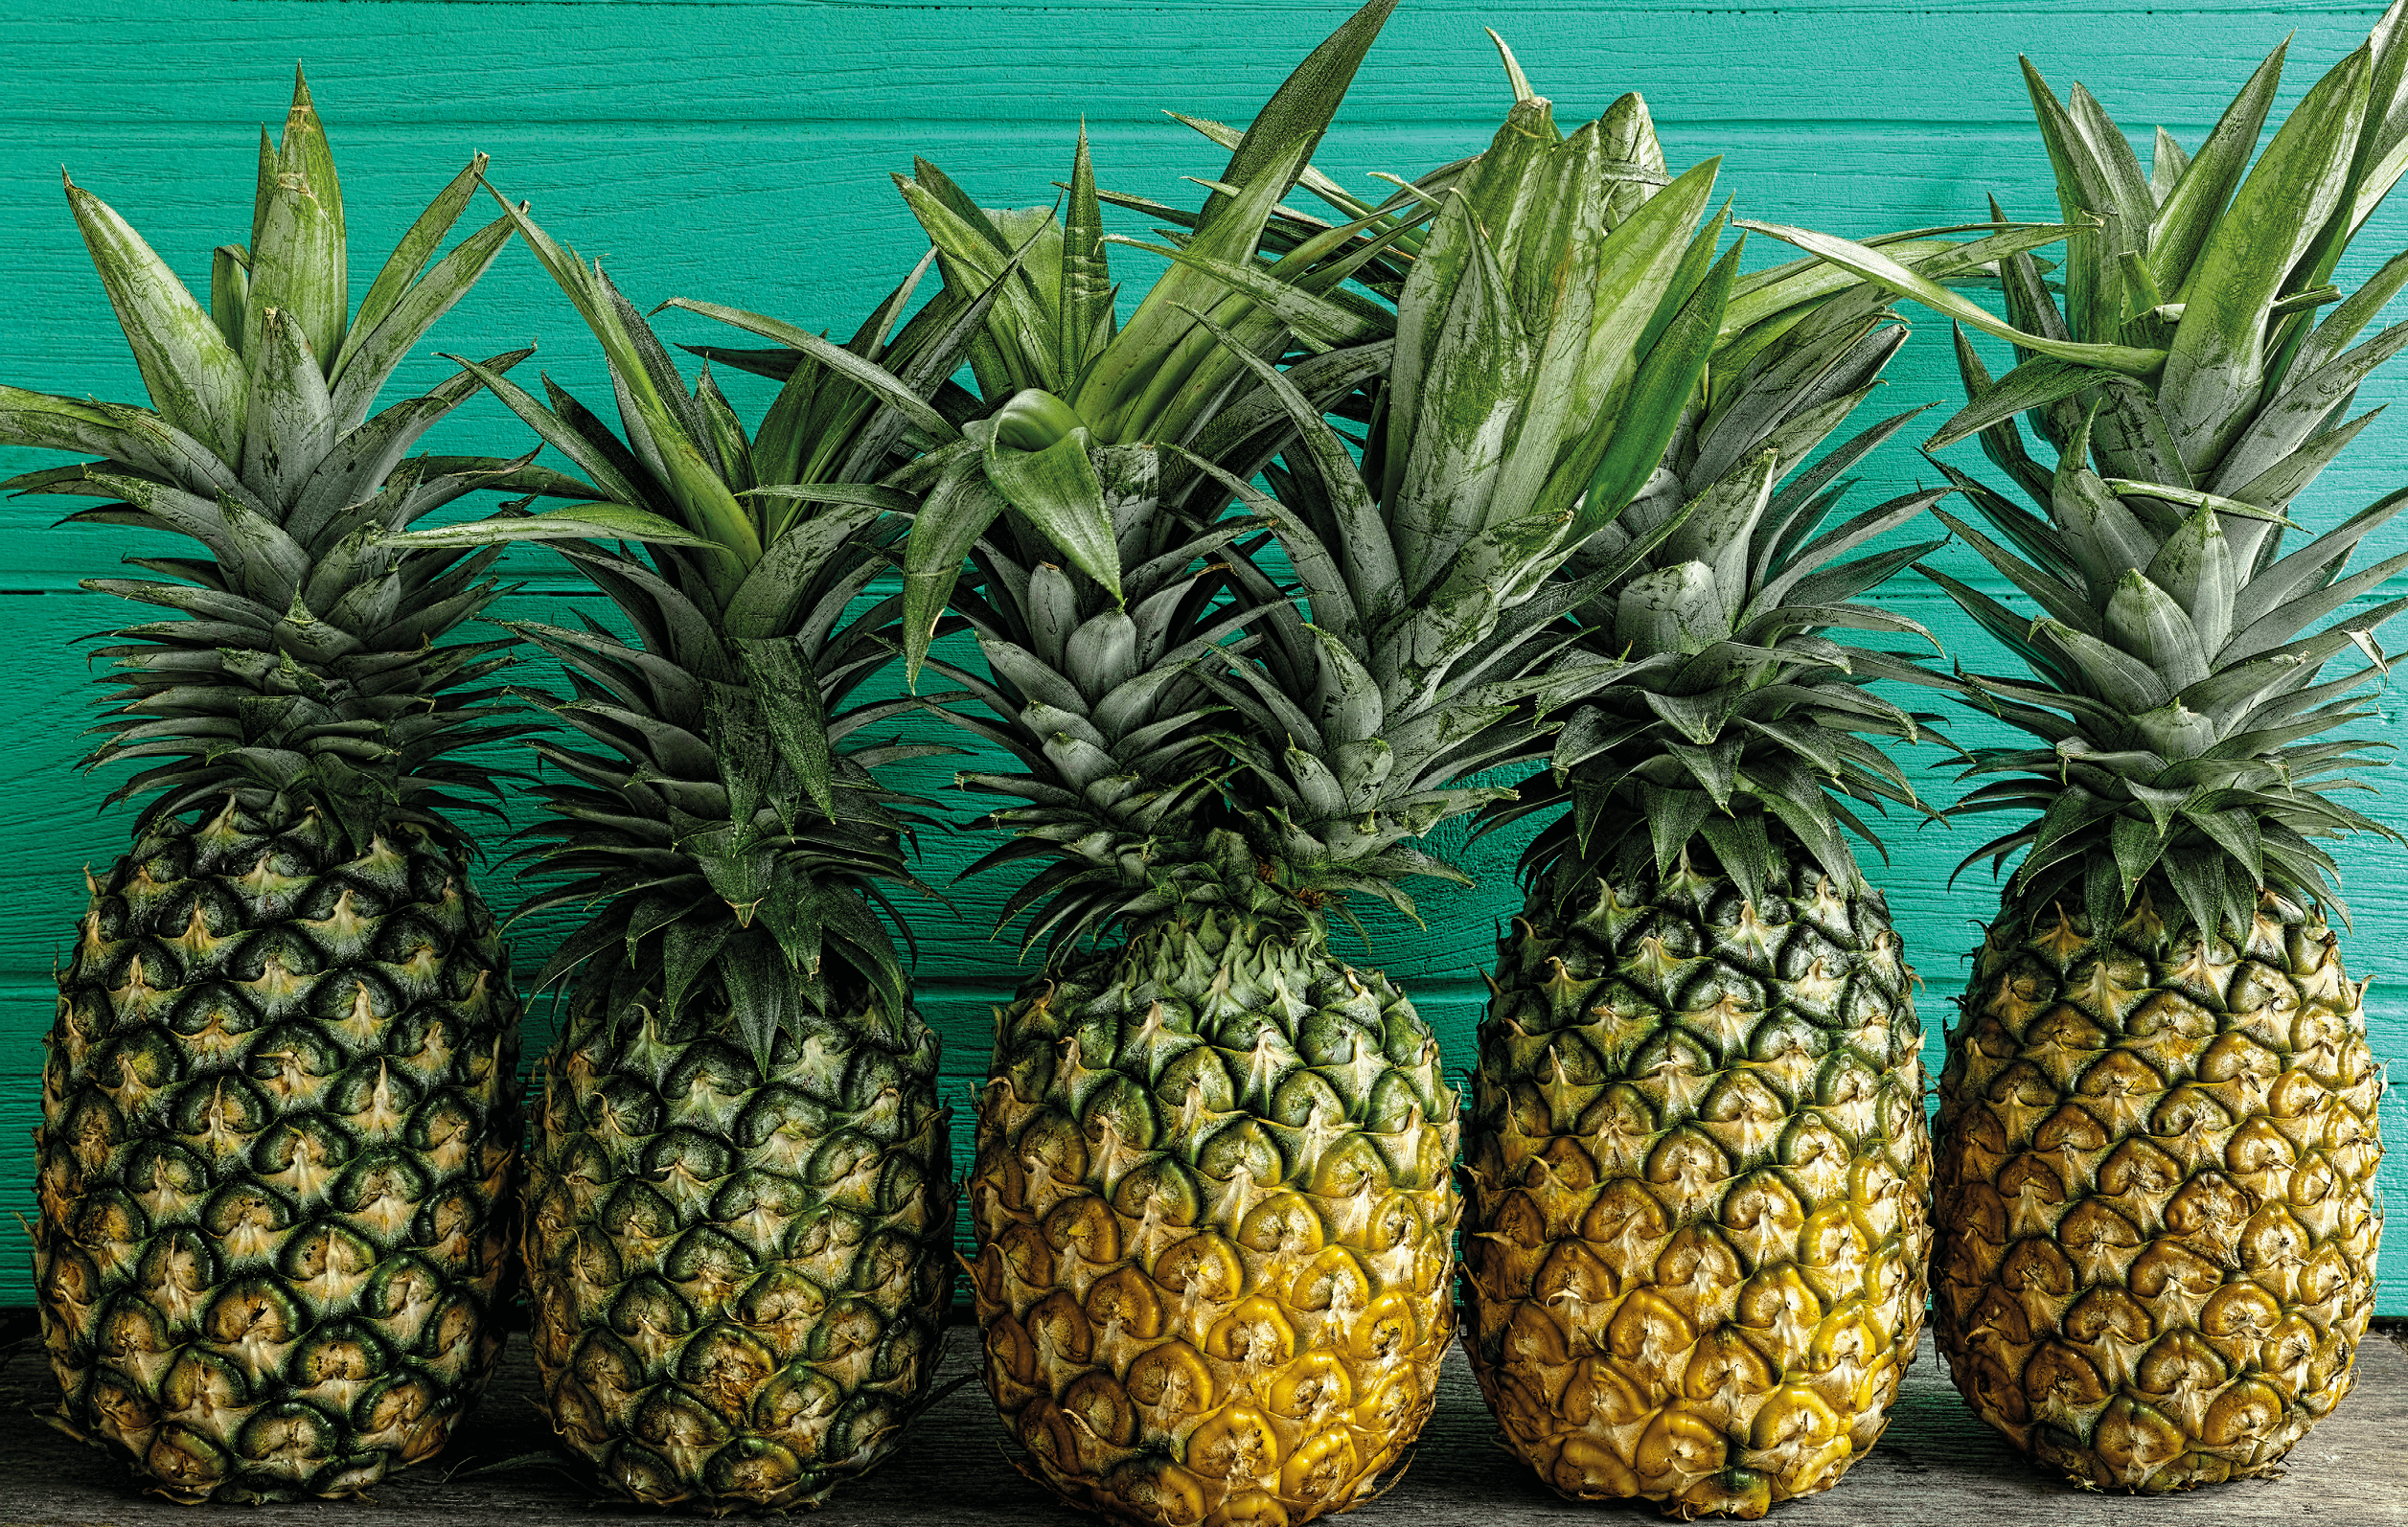 A fresh colorful two-headed tropical pineapple standing in the center of a row of other pineapples on a rustic wooden table against a turquoise wooden walled background. Some copy space above the fruit.